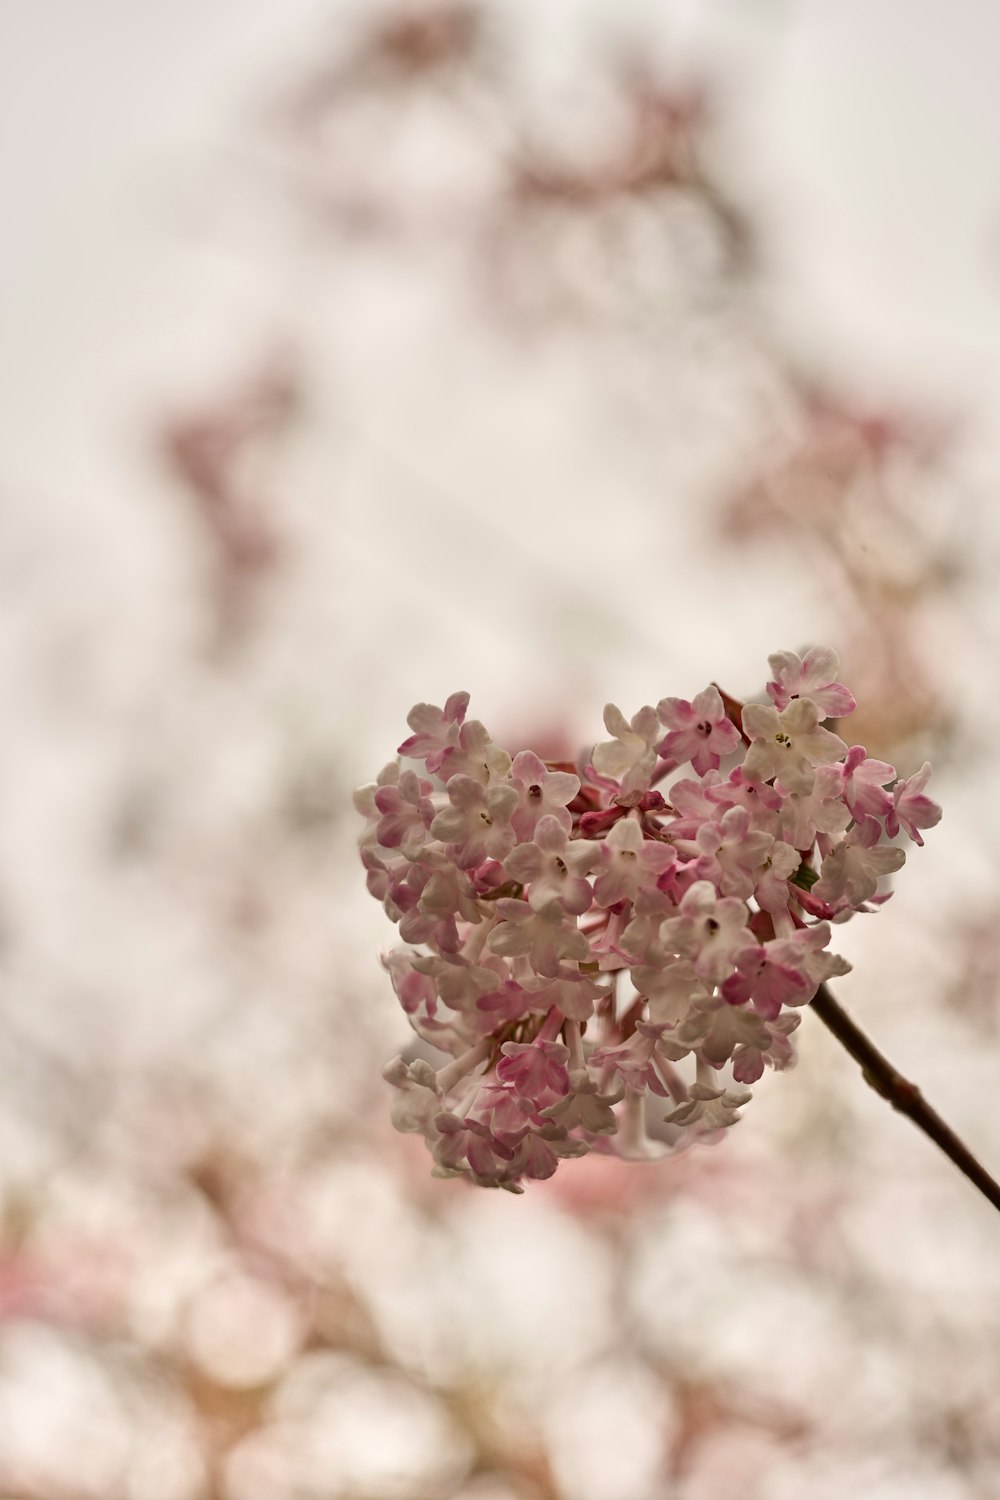 a close up of a flower on a tree branch